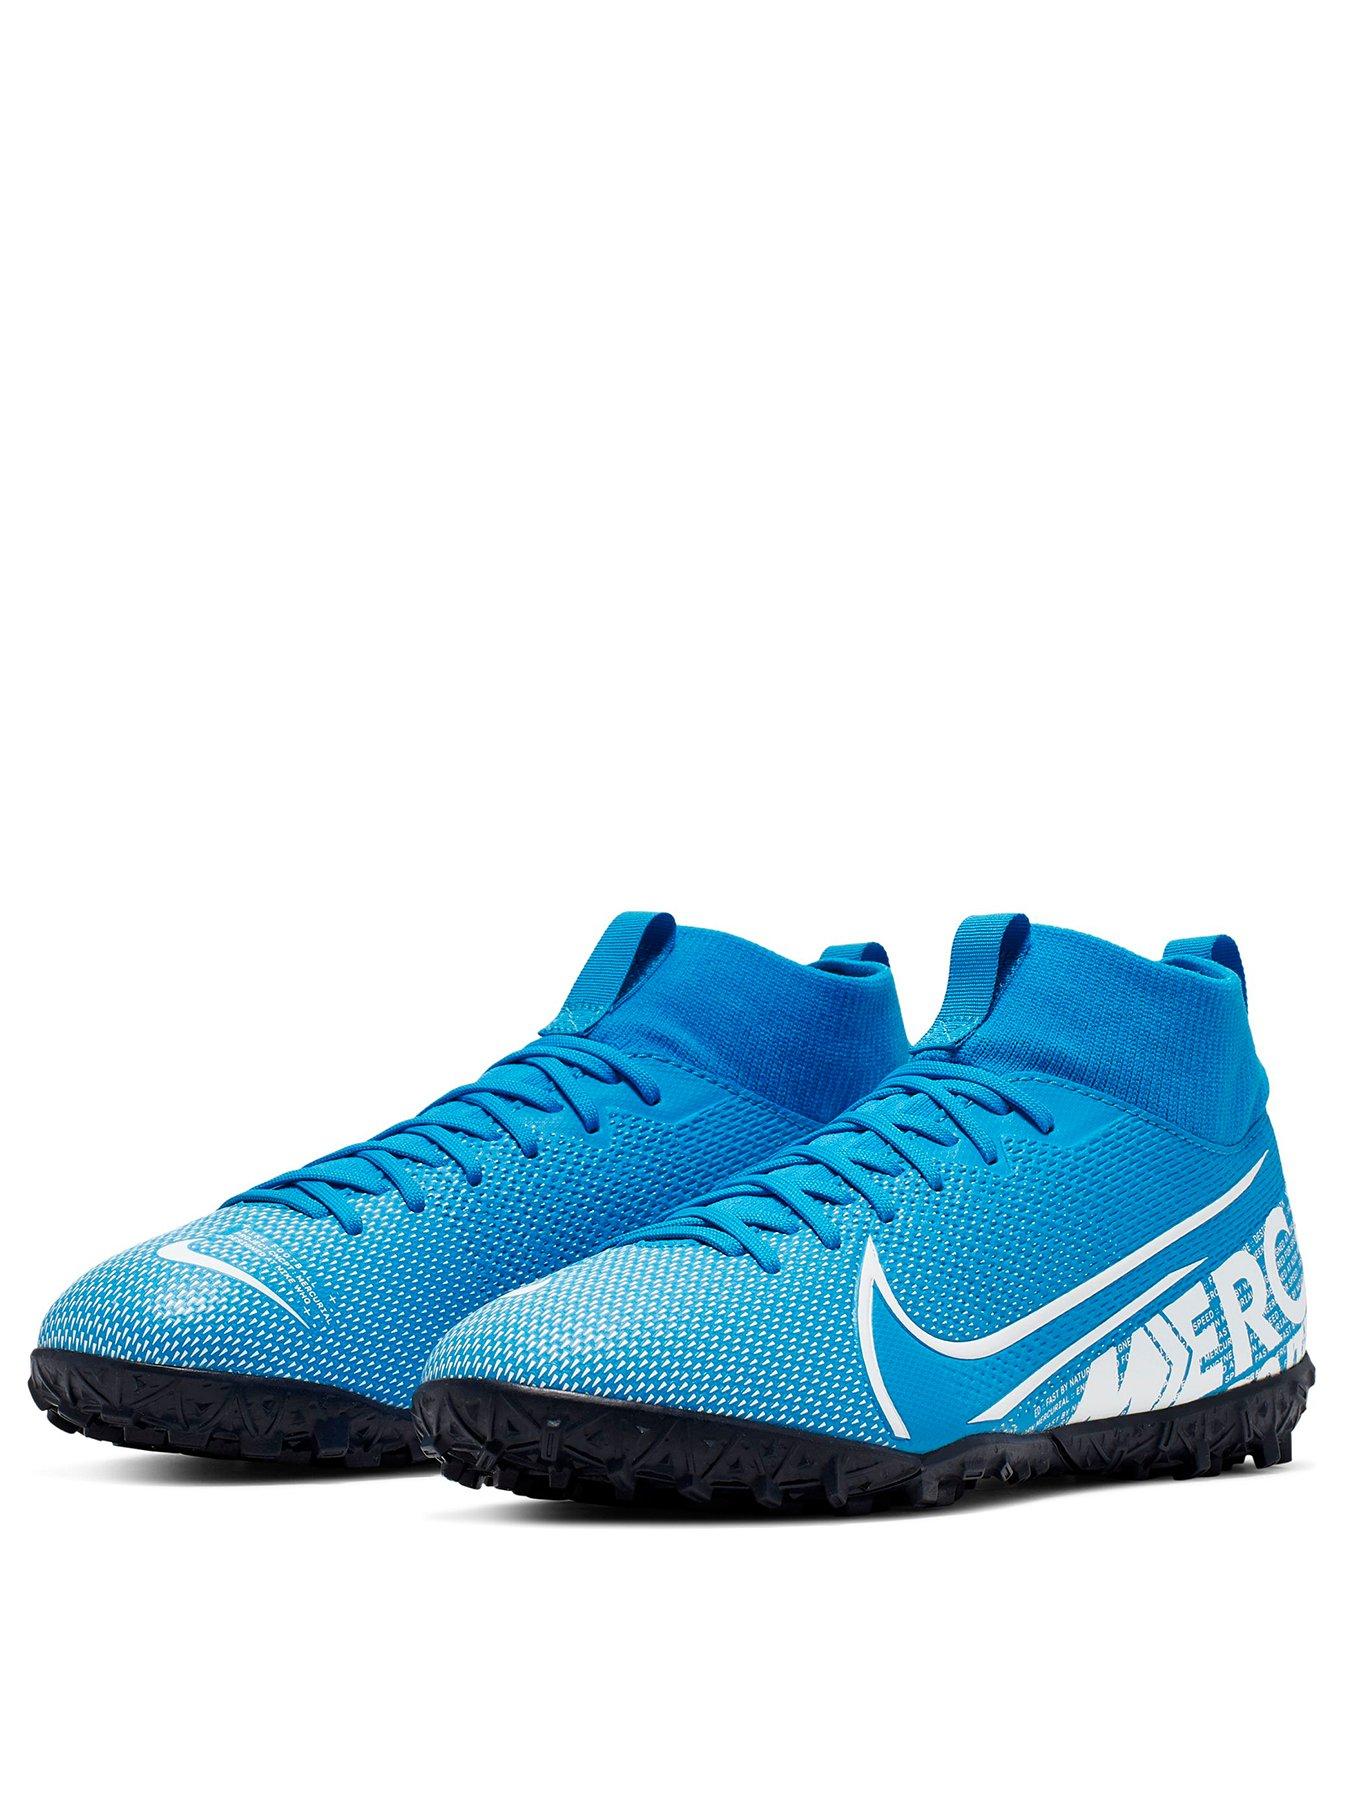 Fish boots Nike Mercurial Superfly 6 Academy TF 701.